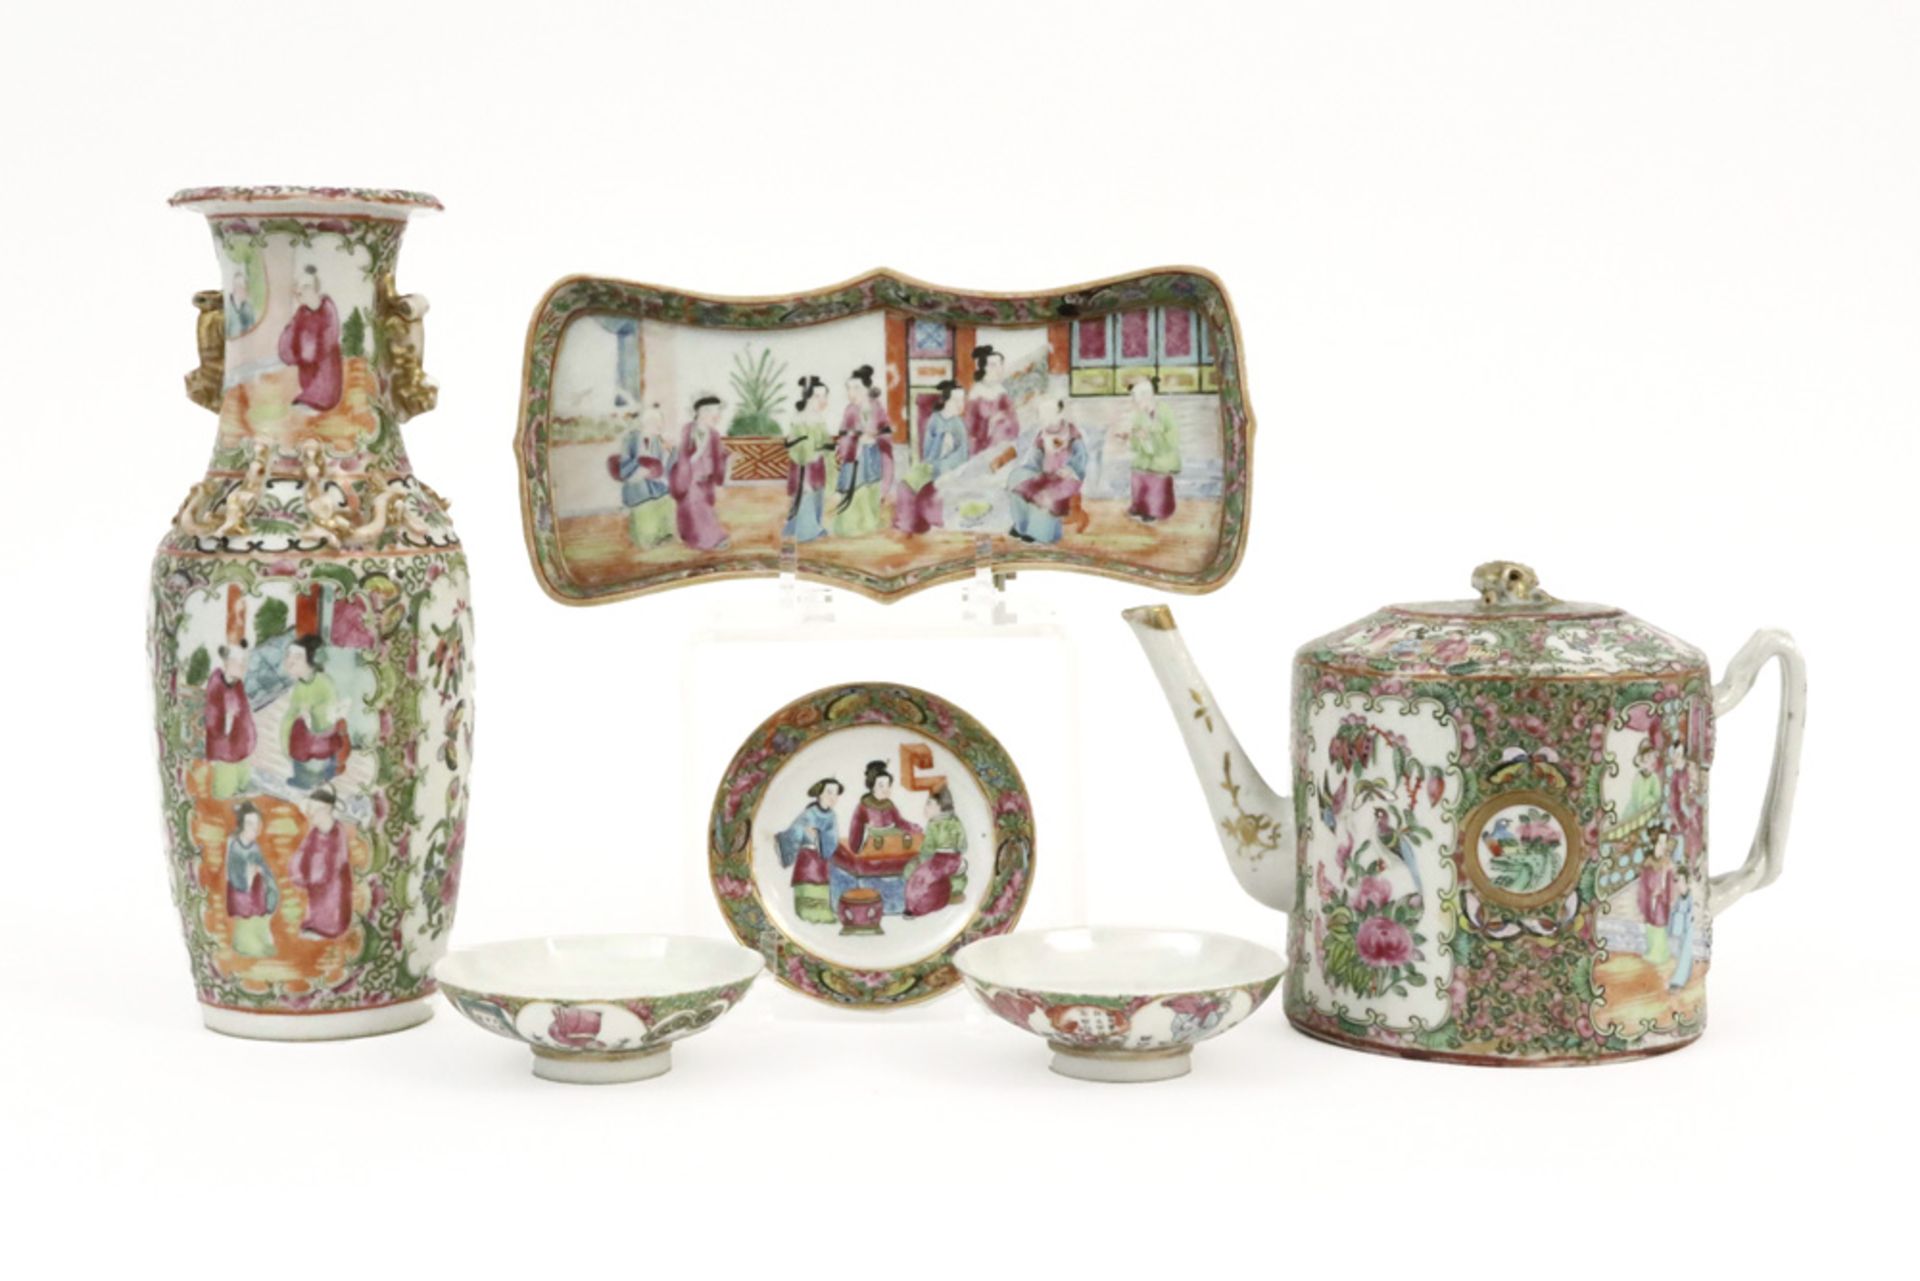 six antique Chinese porcelain items with Cantonese decor, amongst which two small marked dishes with